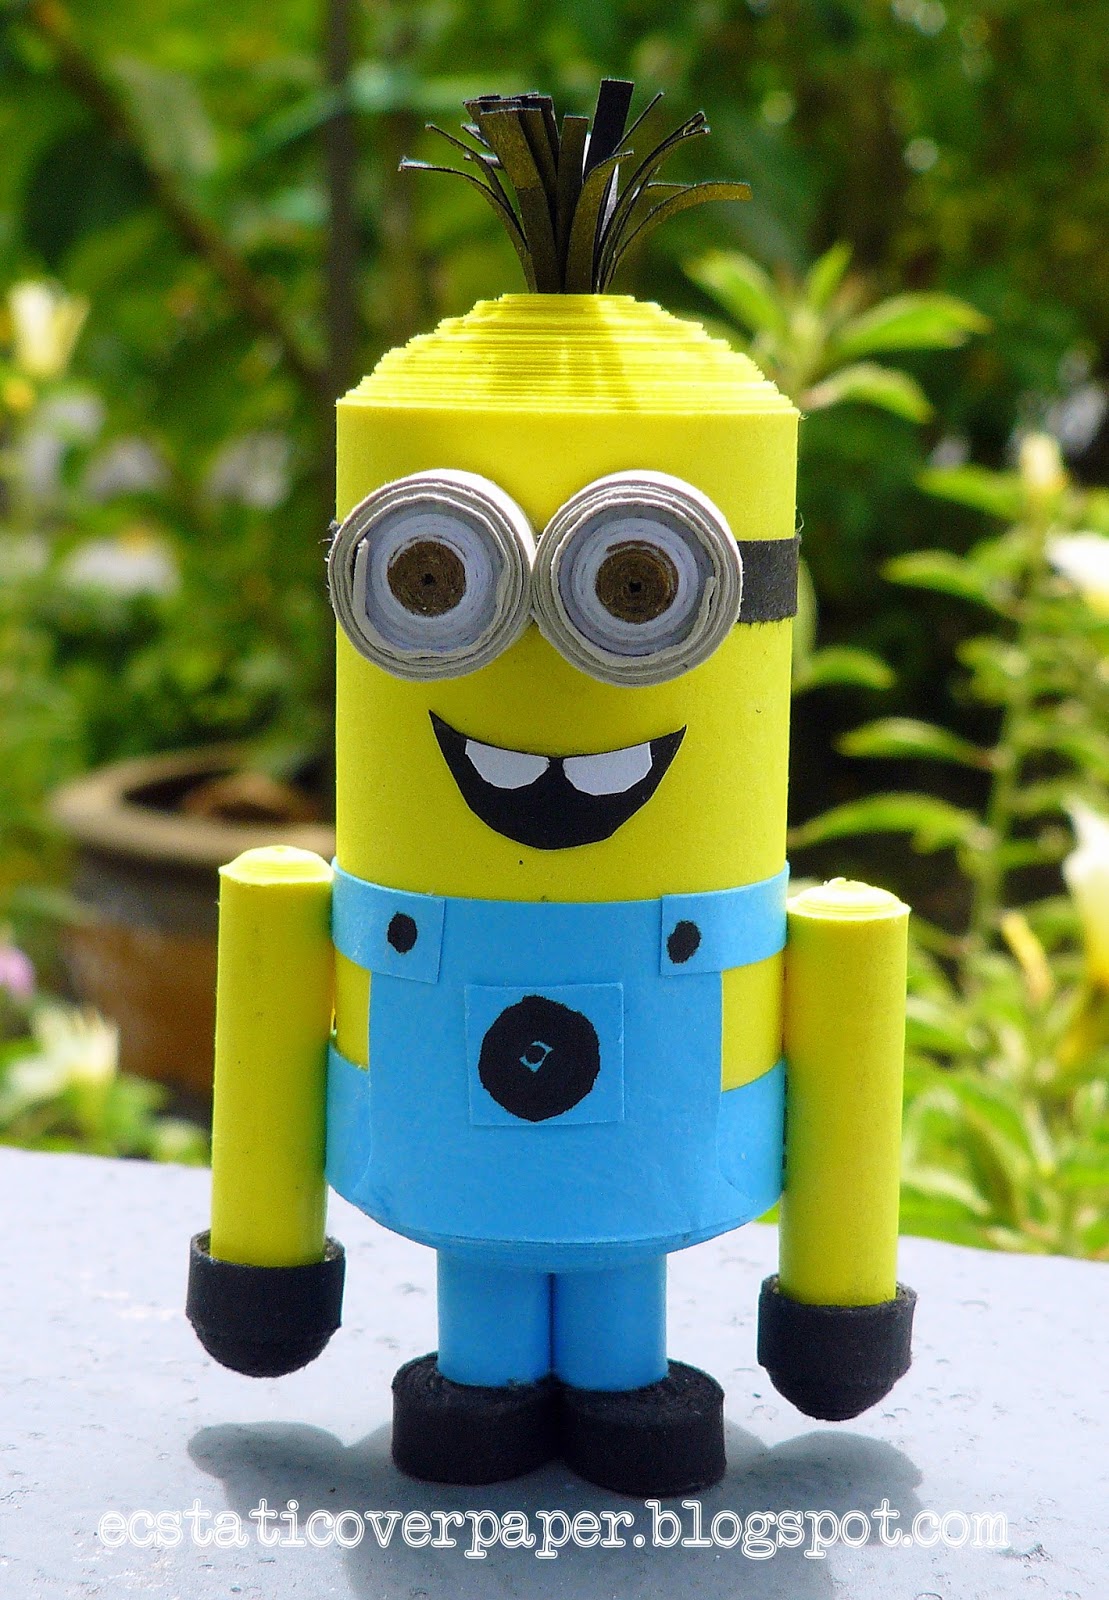 ecstatic over paper: More Minions